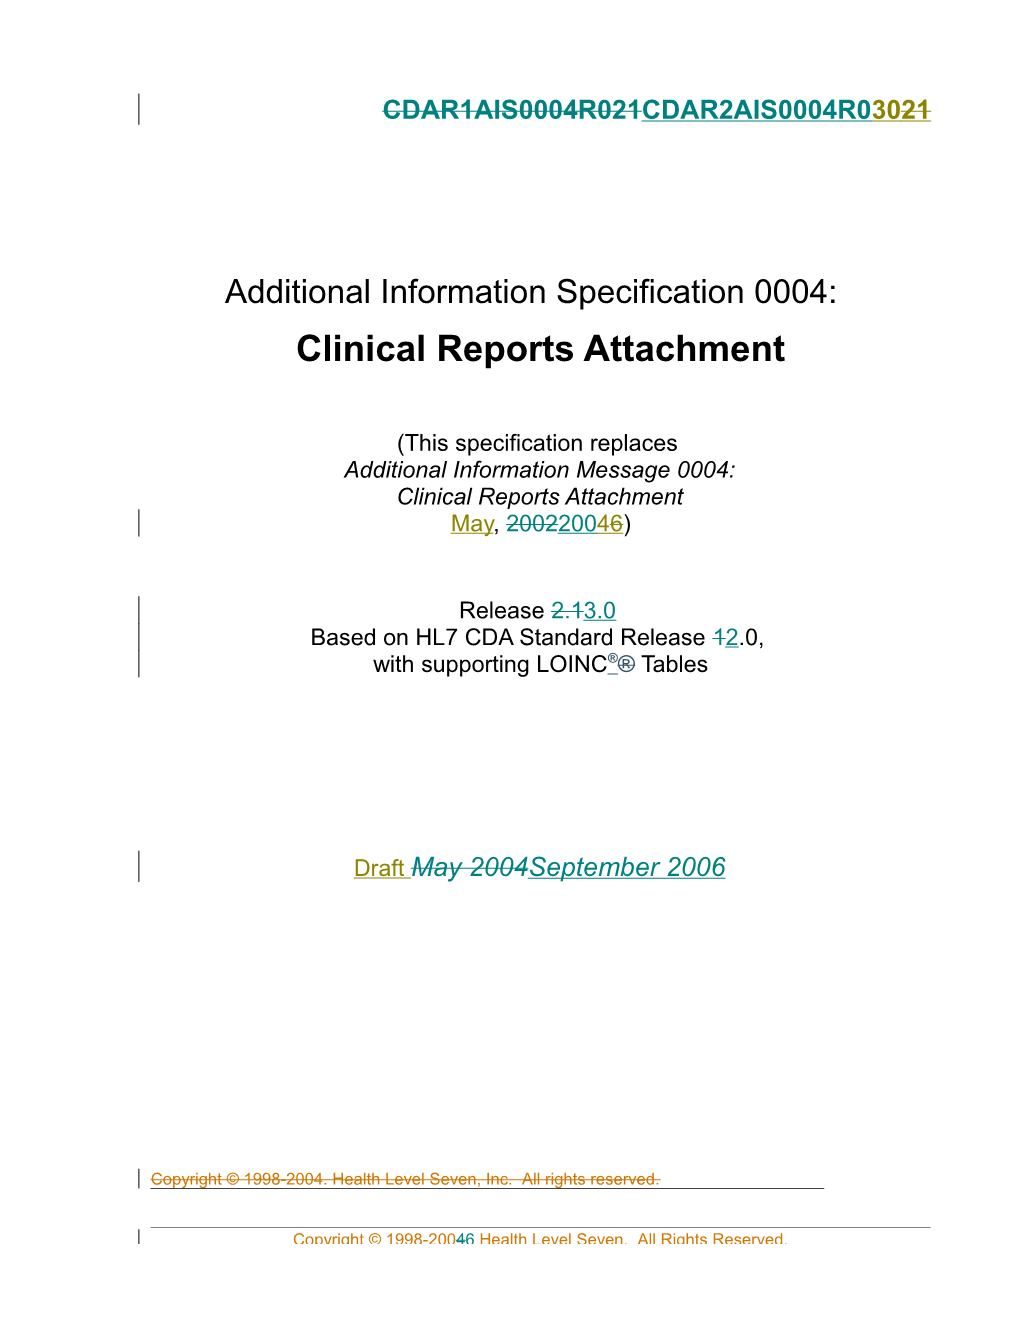 Additional Information Specification 0004